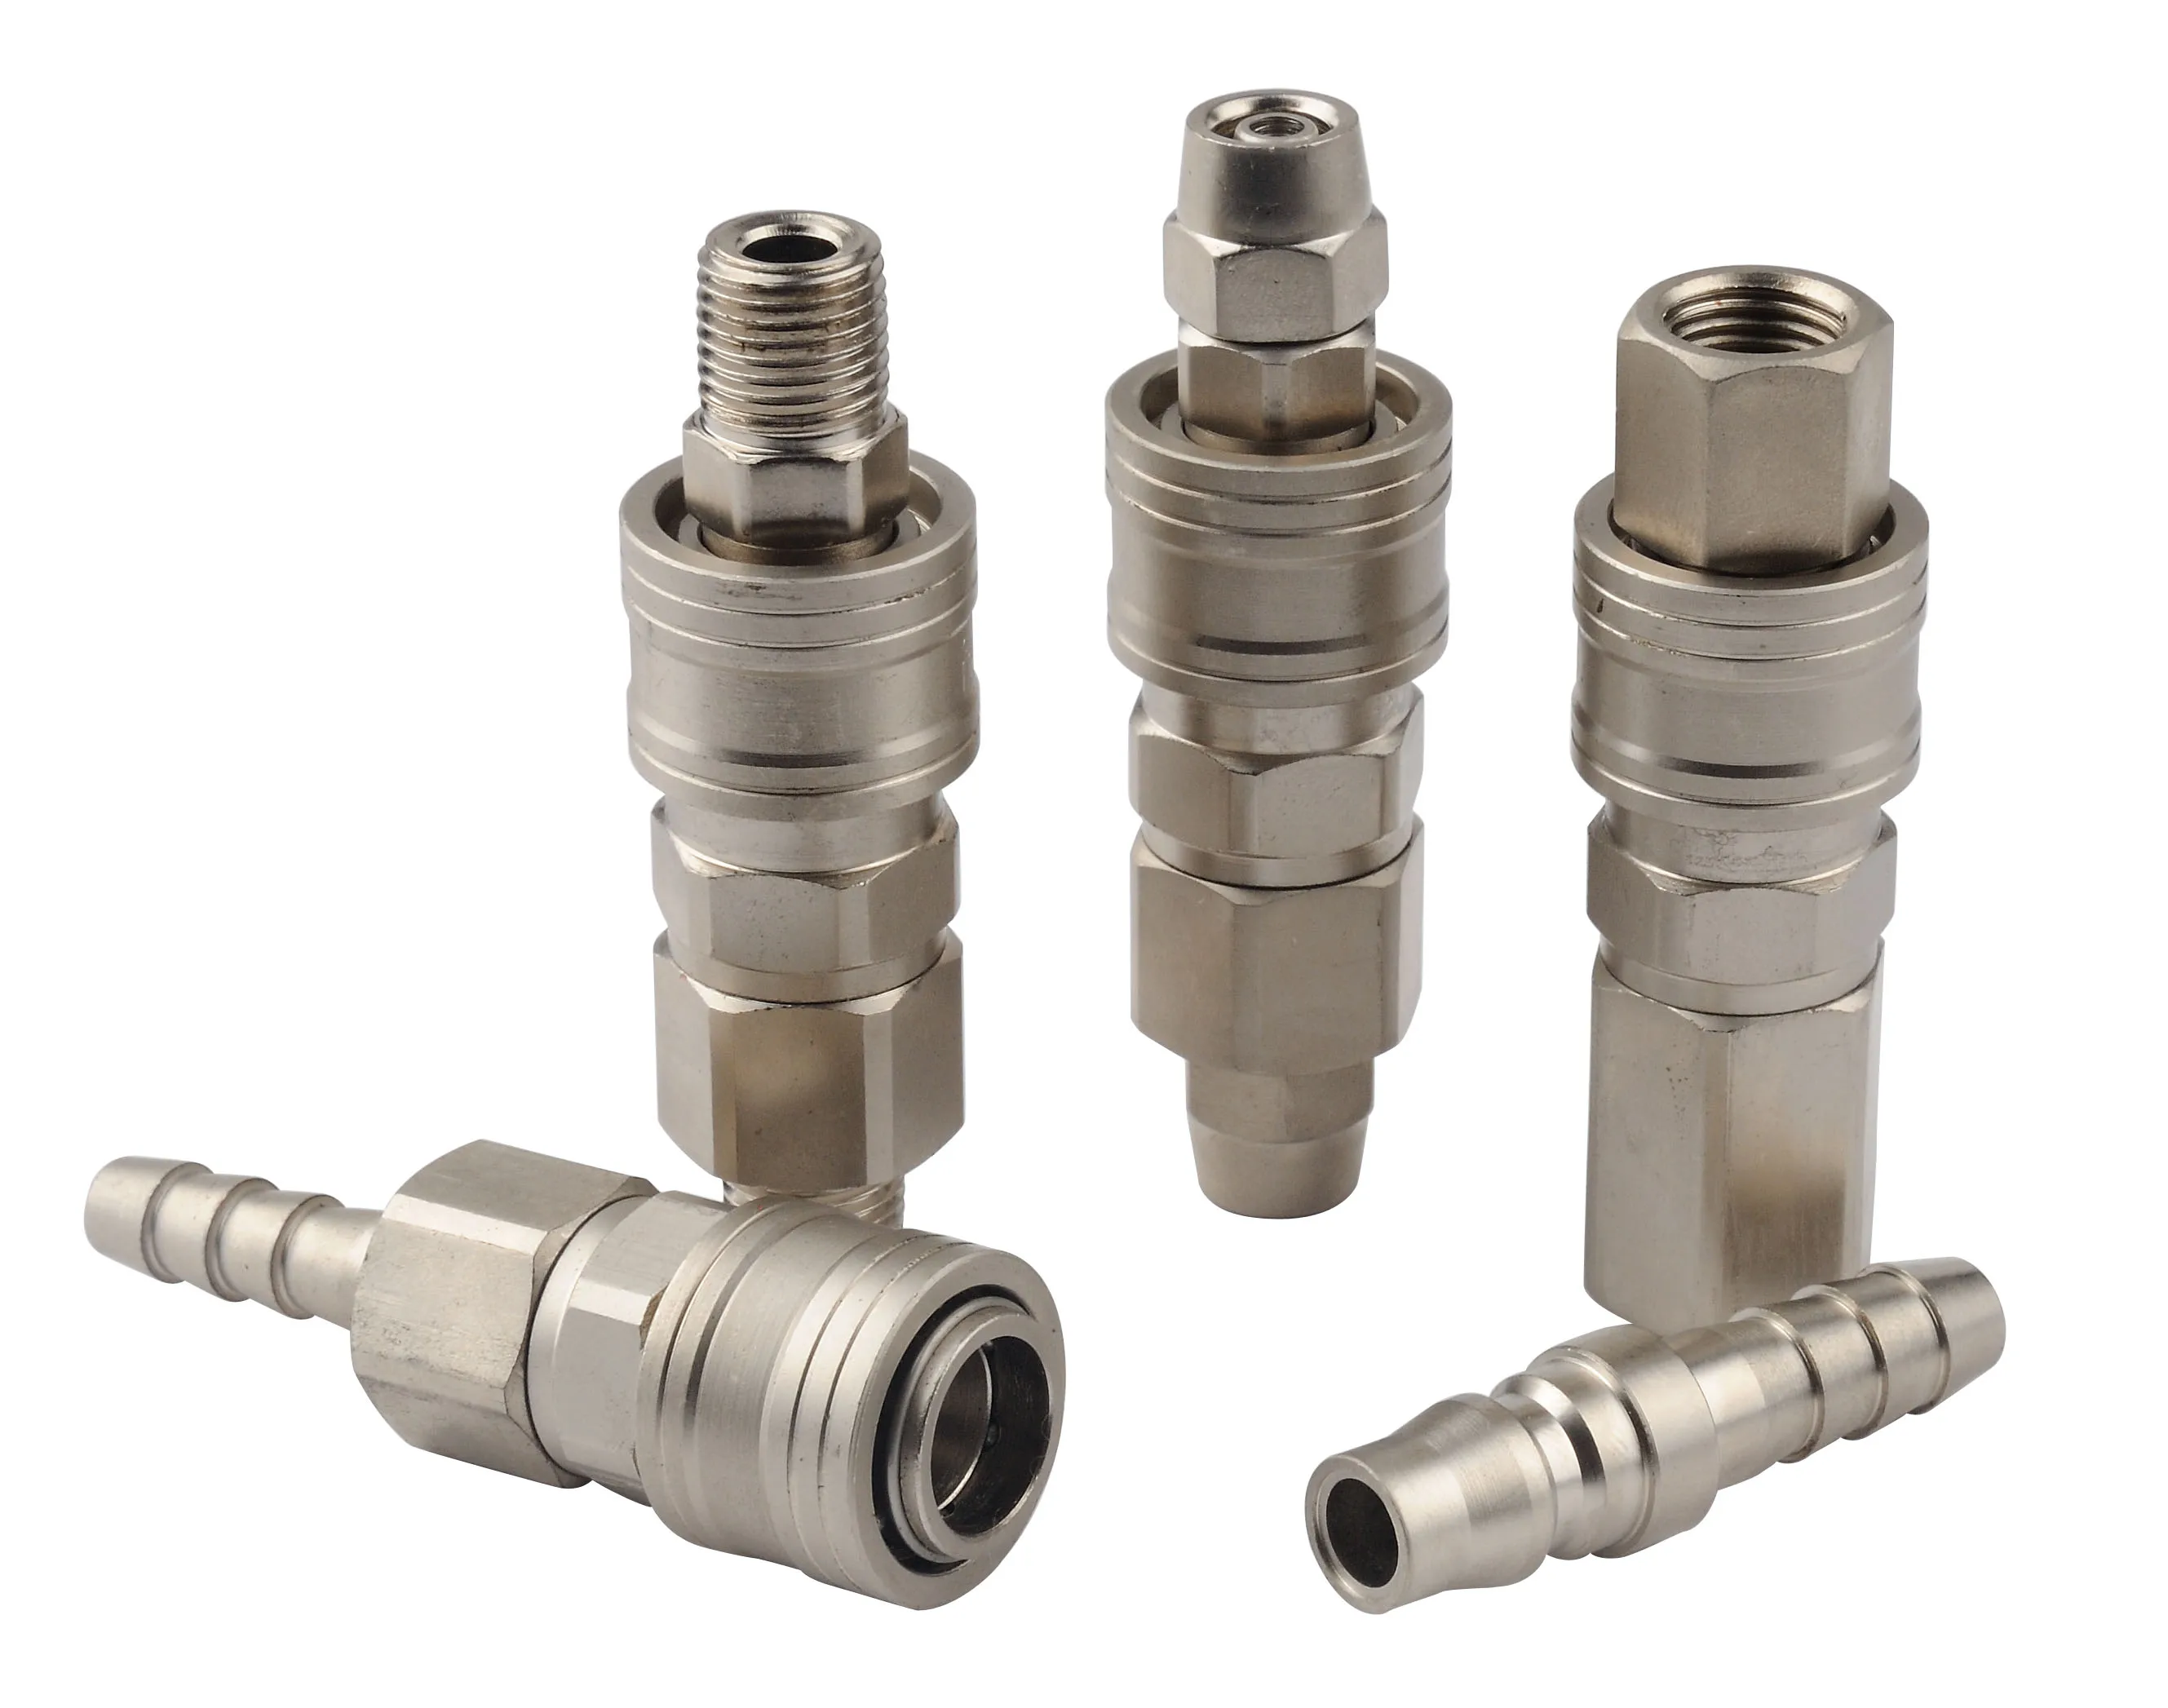 How To Choose The Most Efficiently Manufactured Quick Connect Coupling